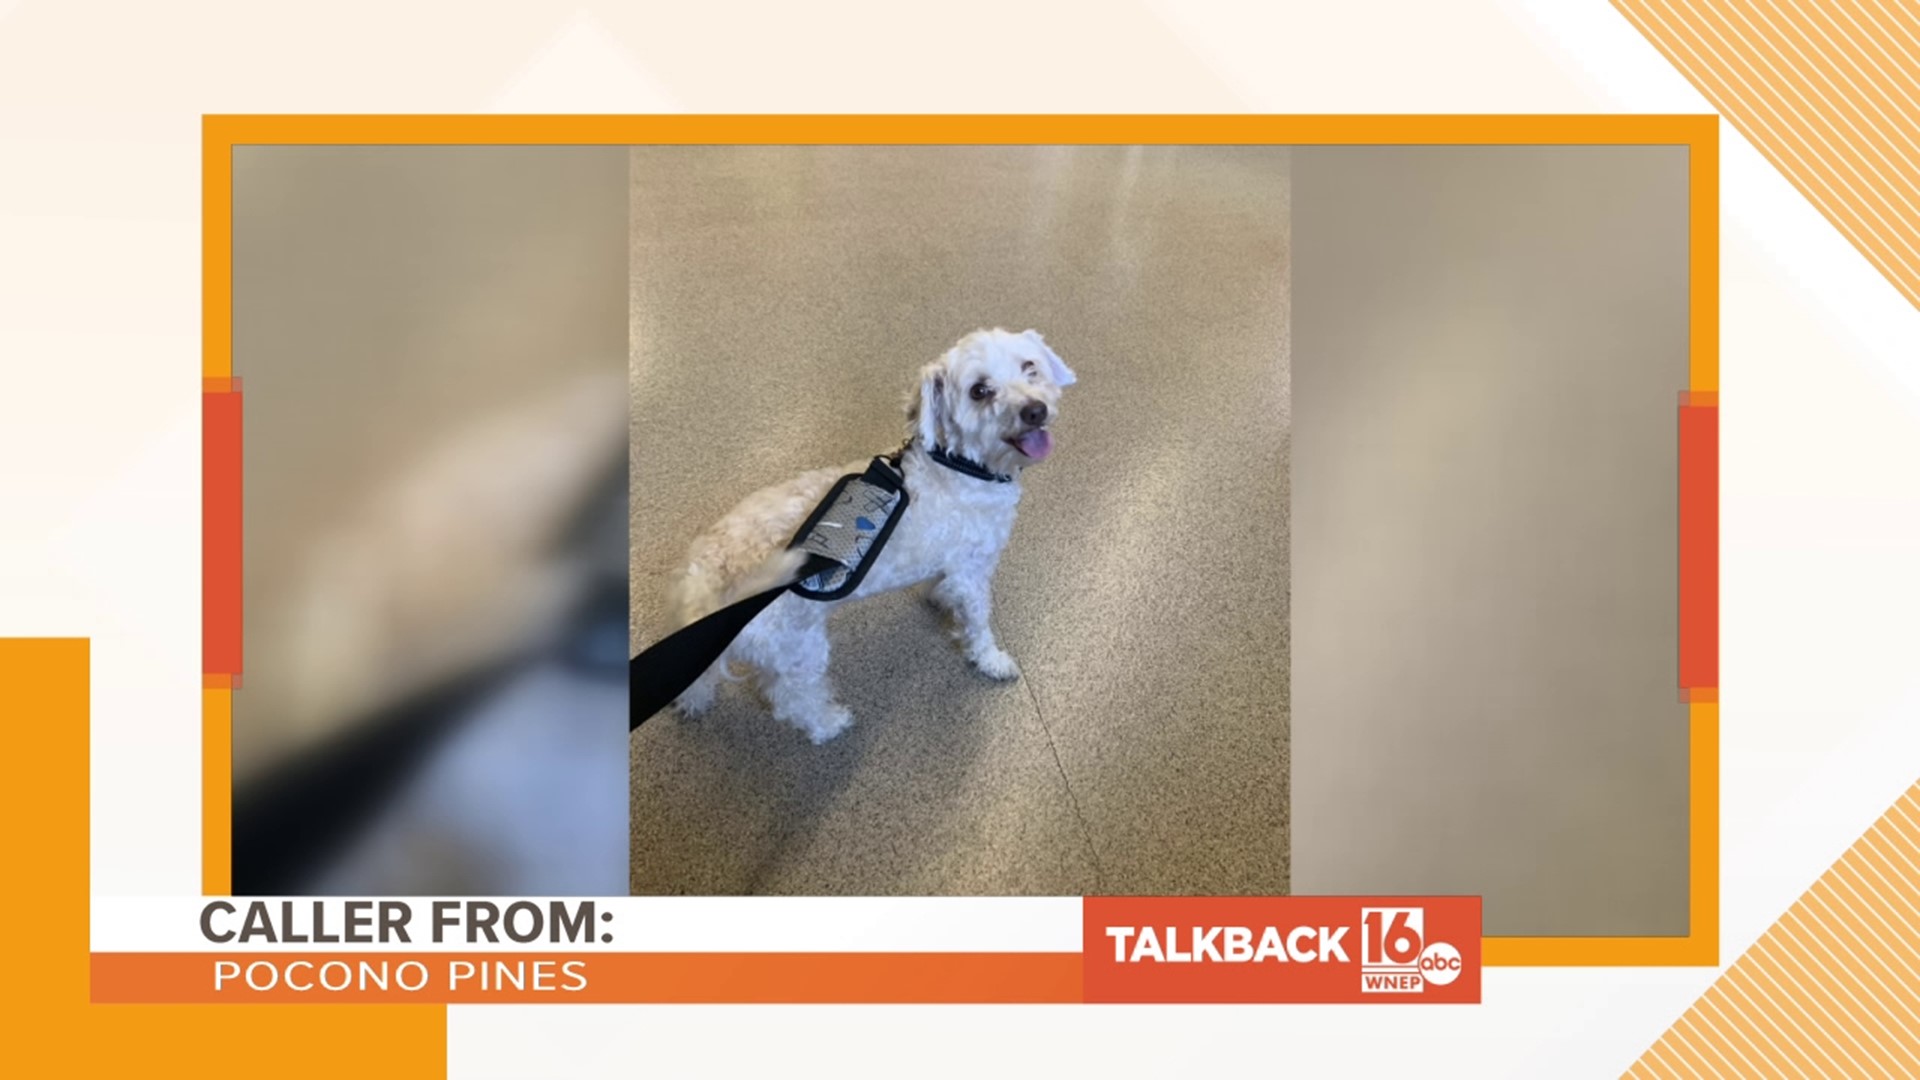 In this Talkback 16, a caller from Pocono Pines is happy to hear the good news about Milo the missing dog.